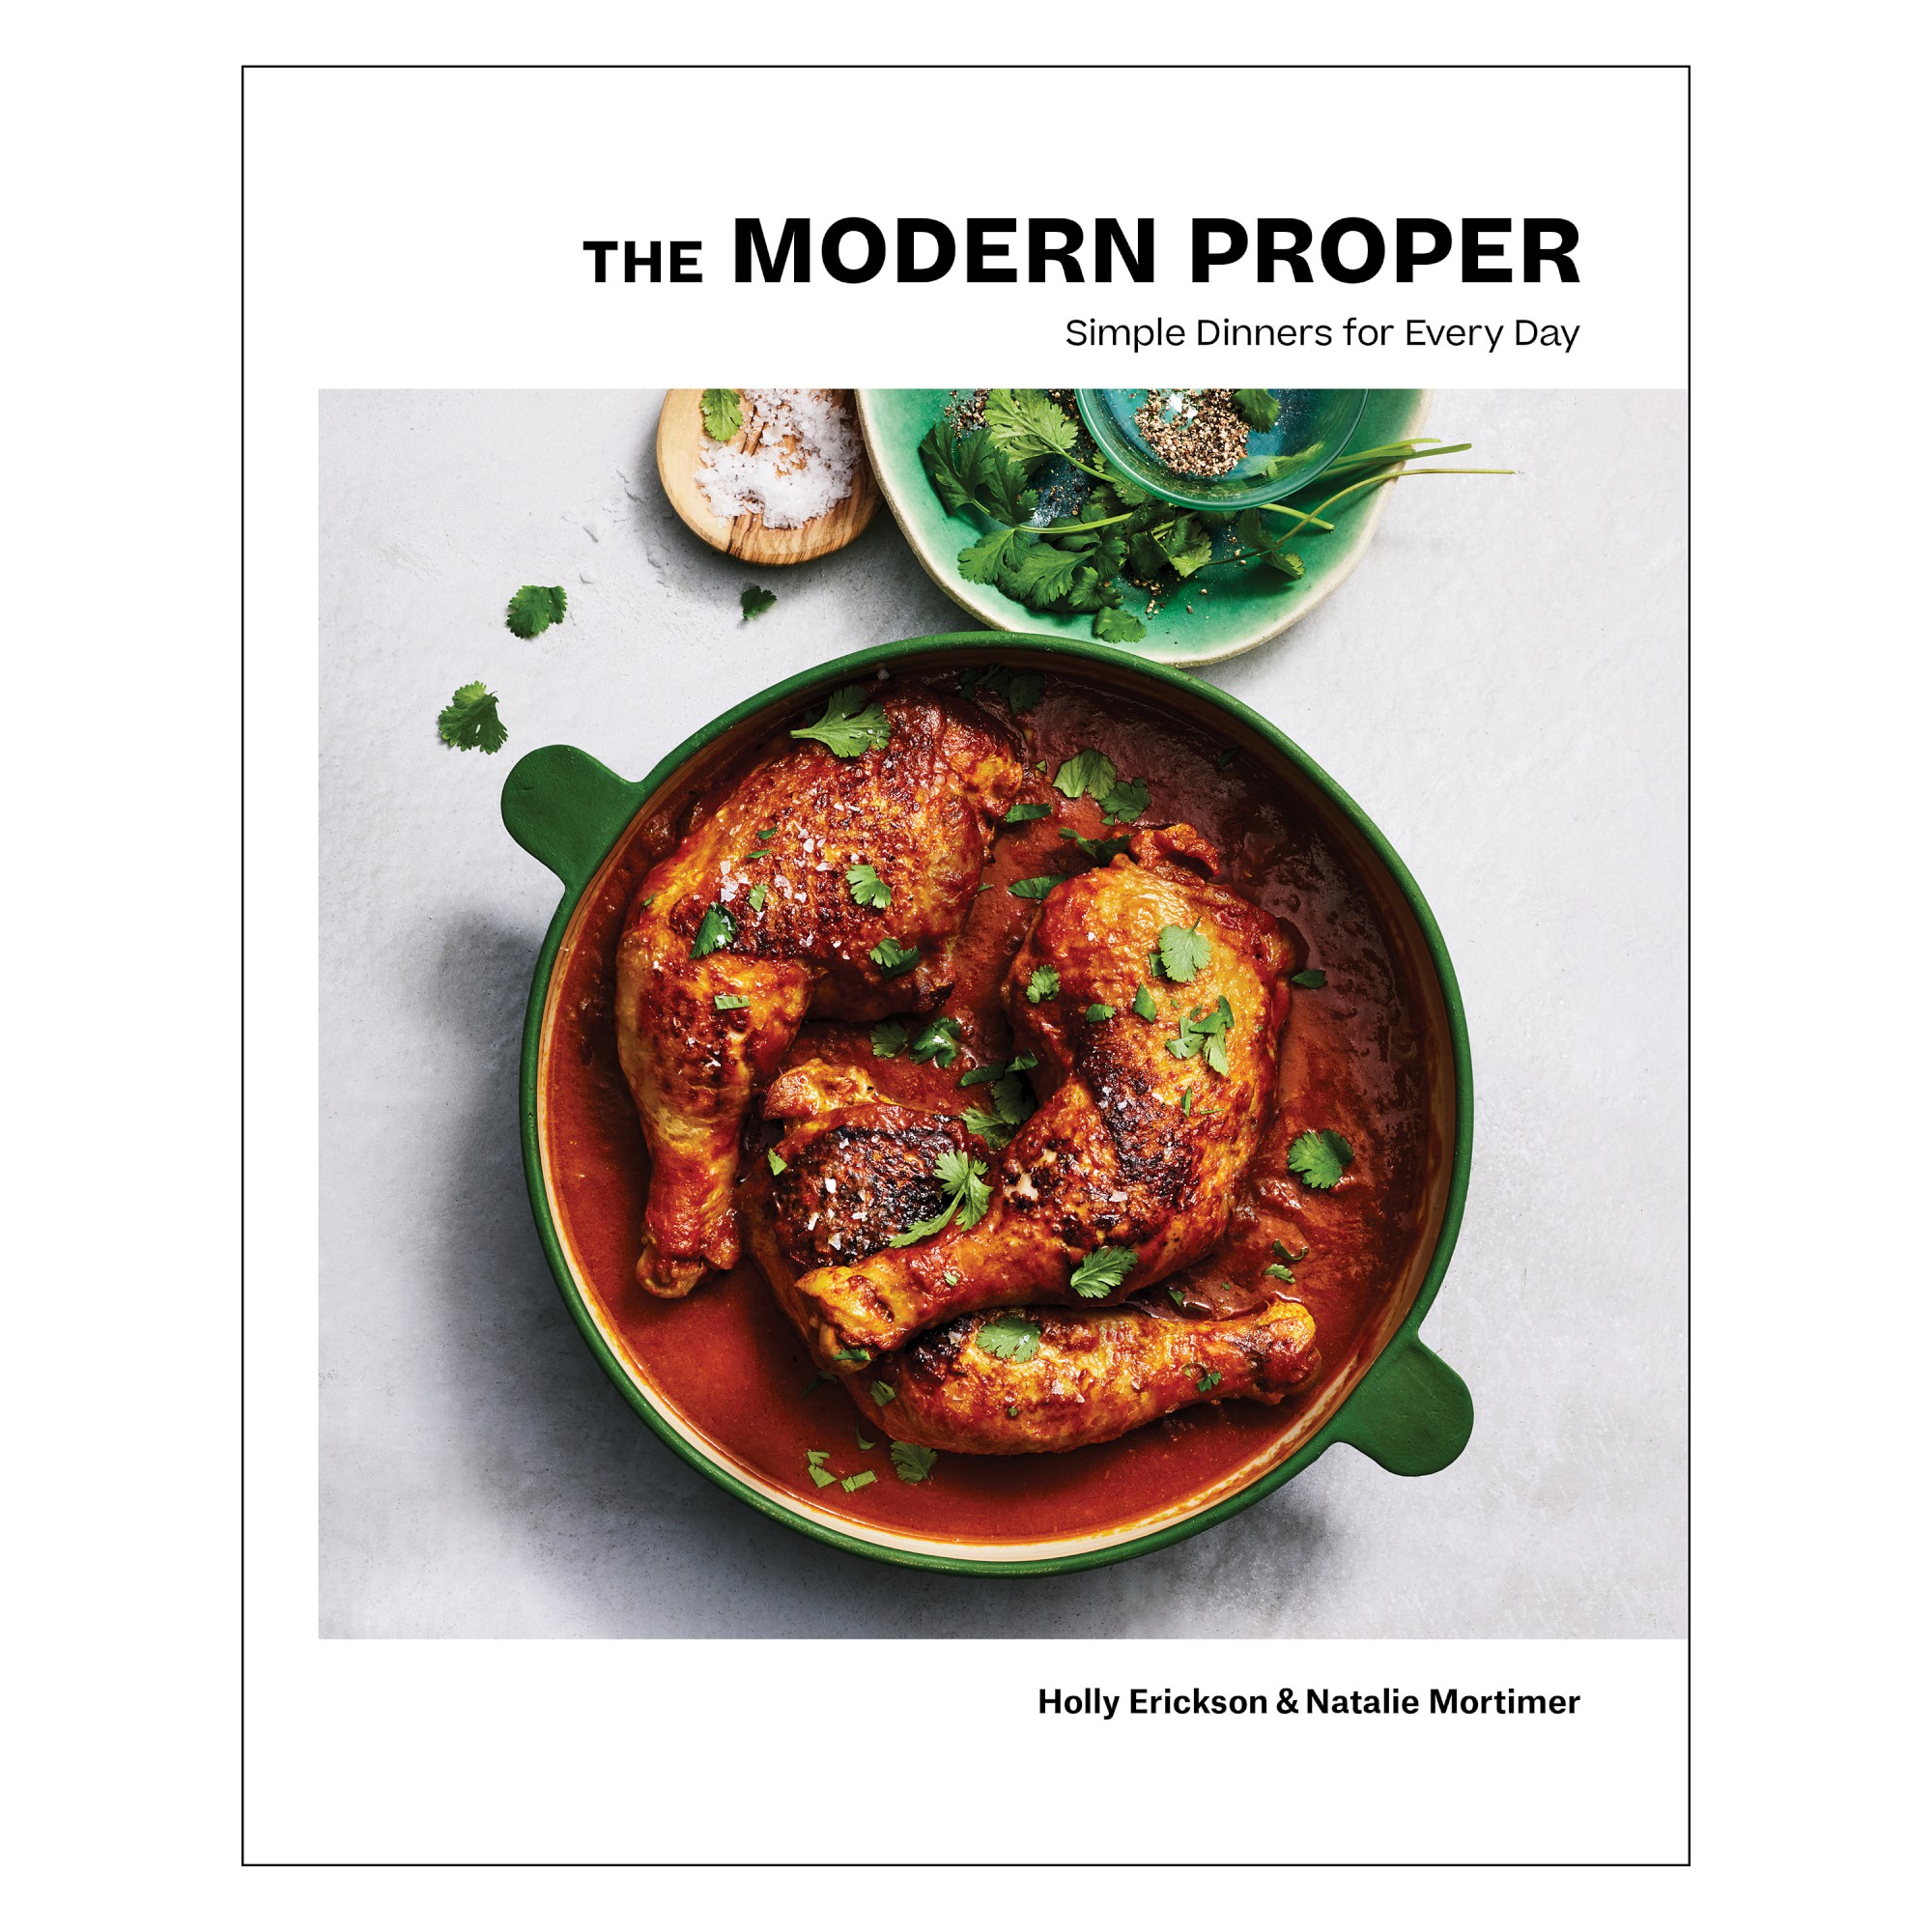 Natalie Mortimer, Holly Erickson: The Modern Proper: Simple Dinners for Every Day